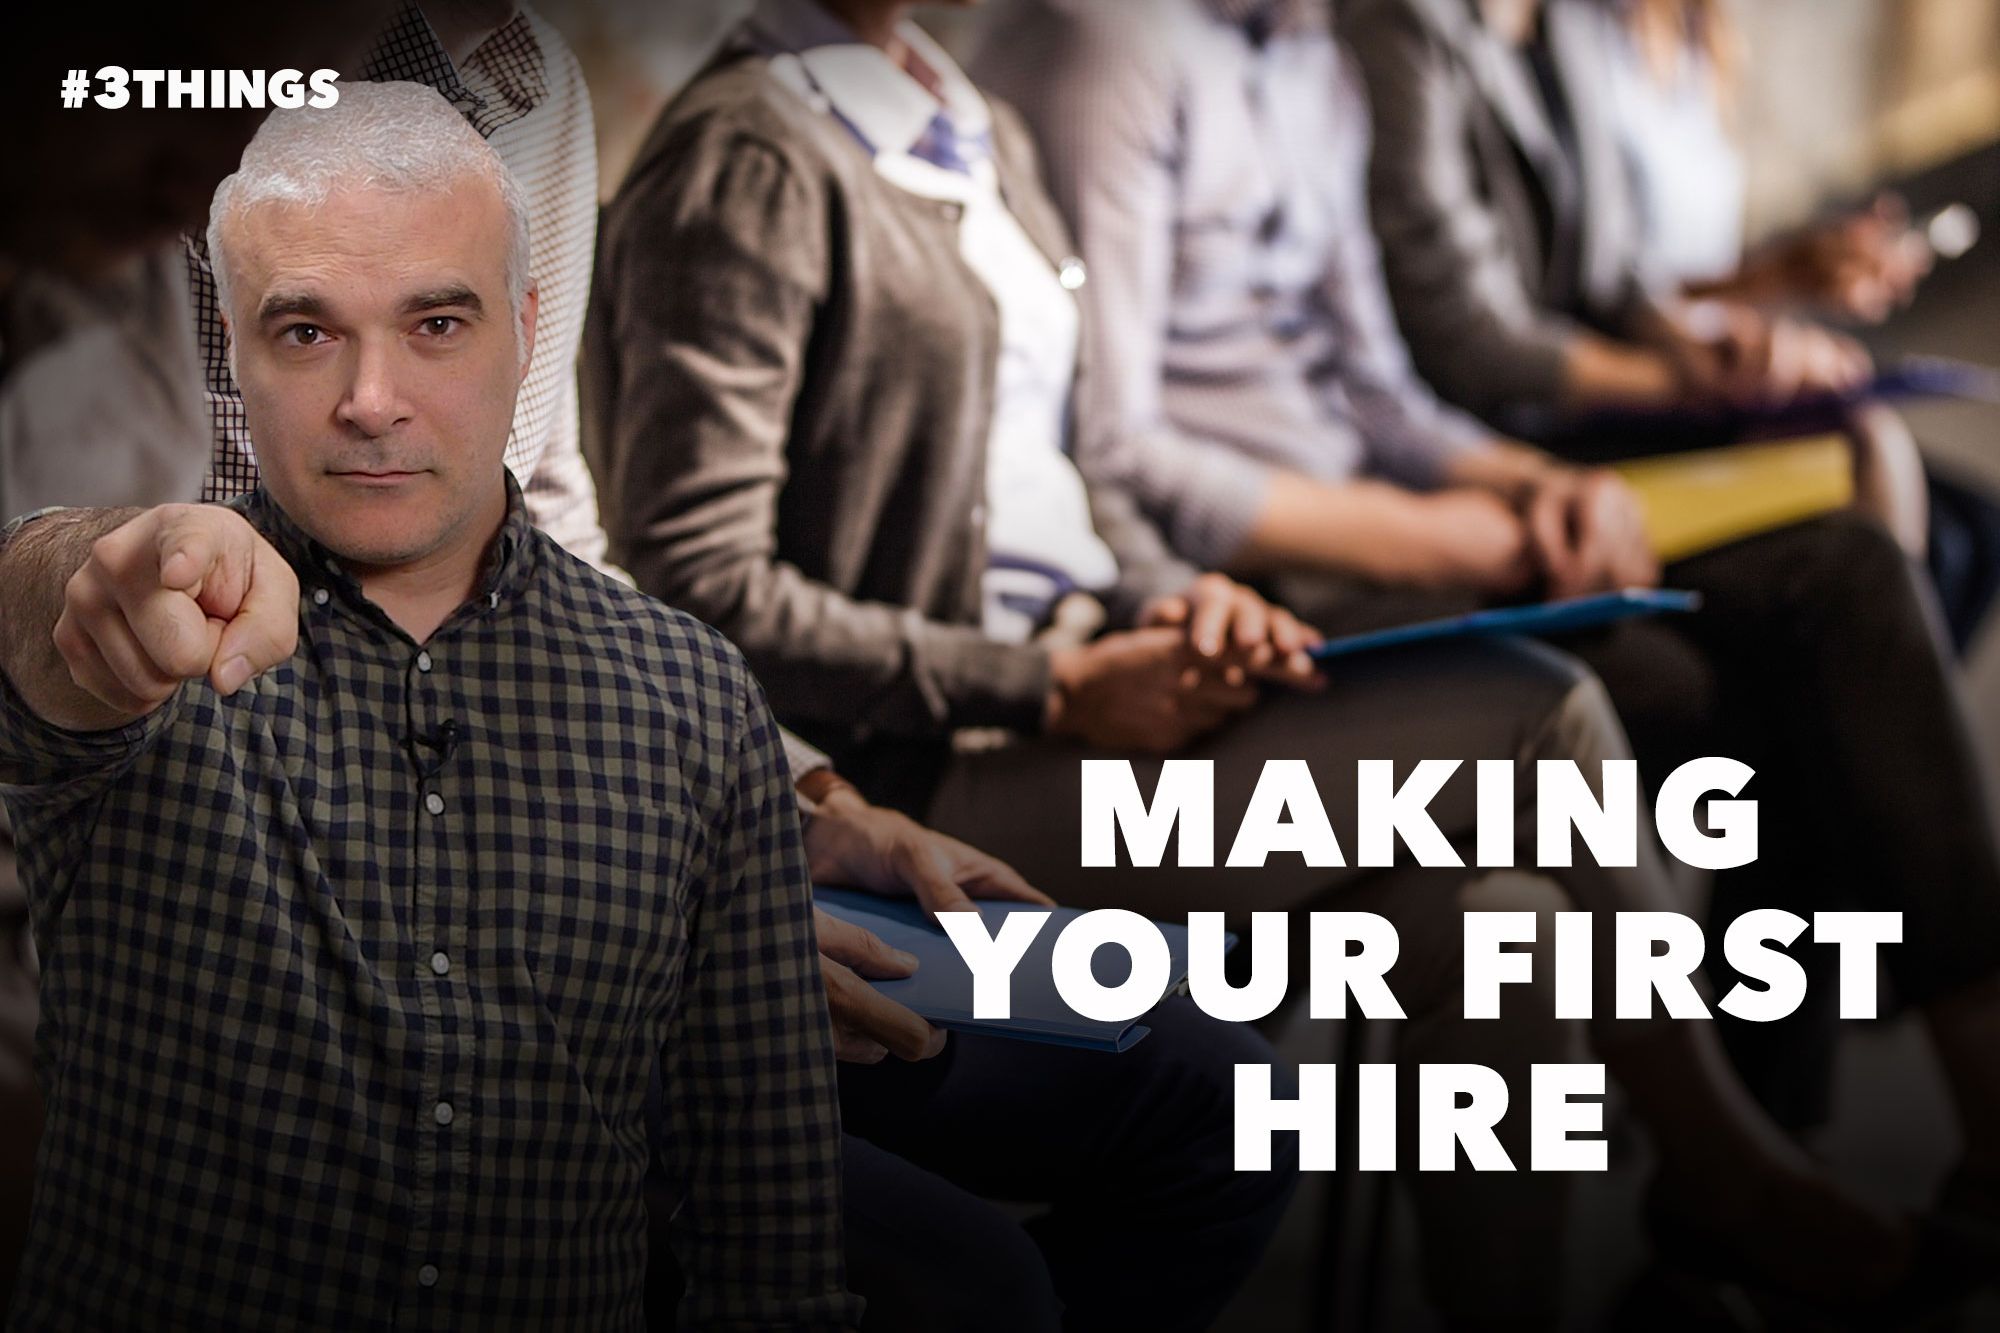 3 Things to Look for Before You Hire Your First Employee (60-Second Video)